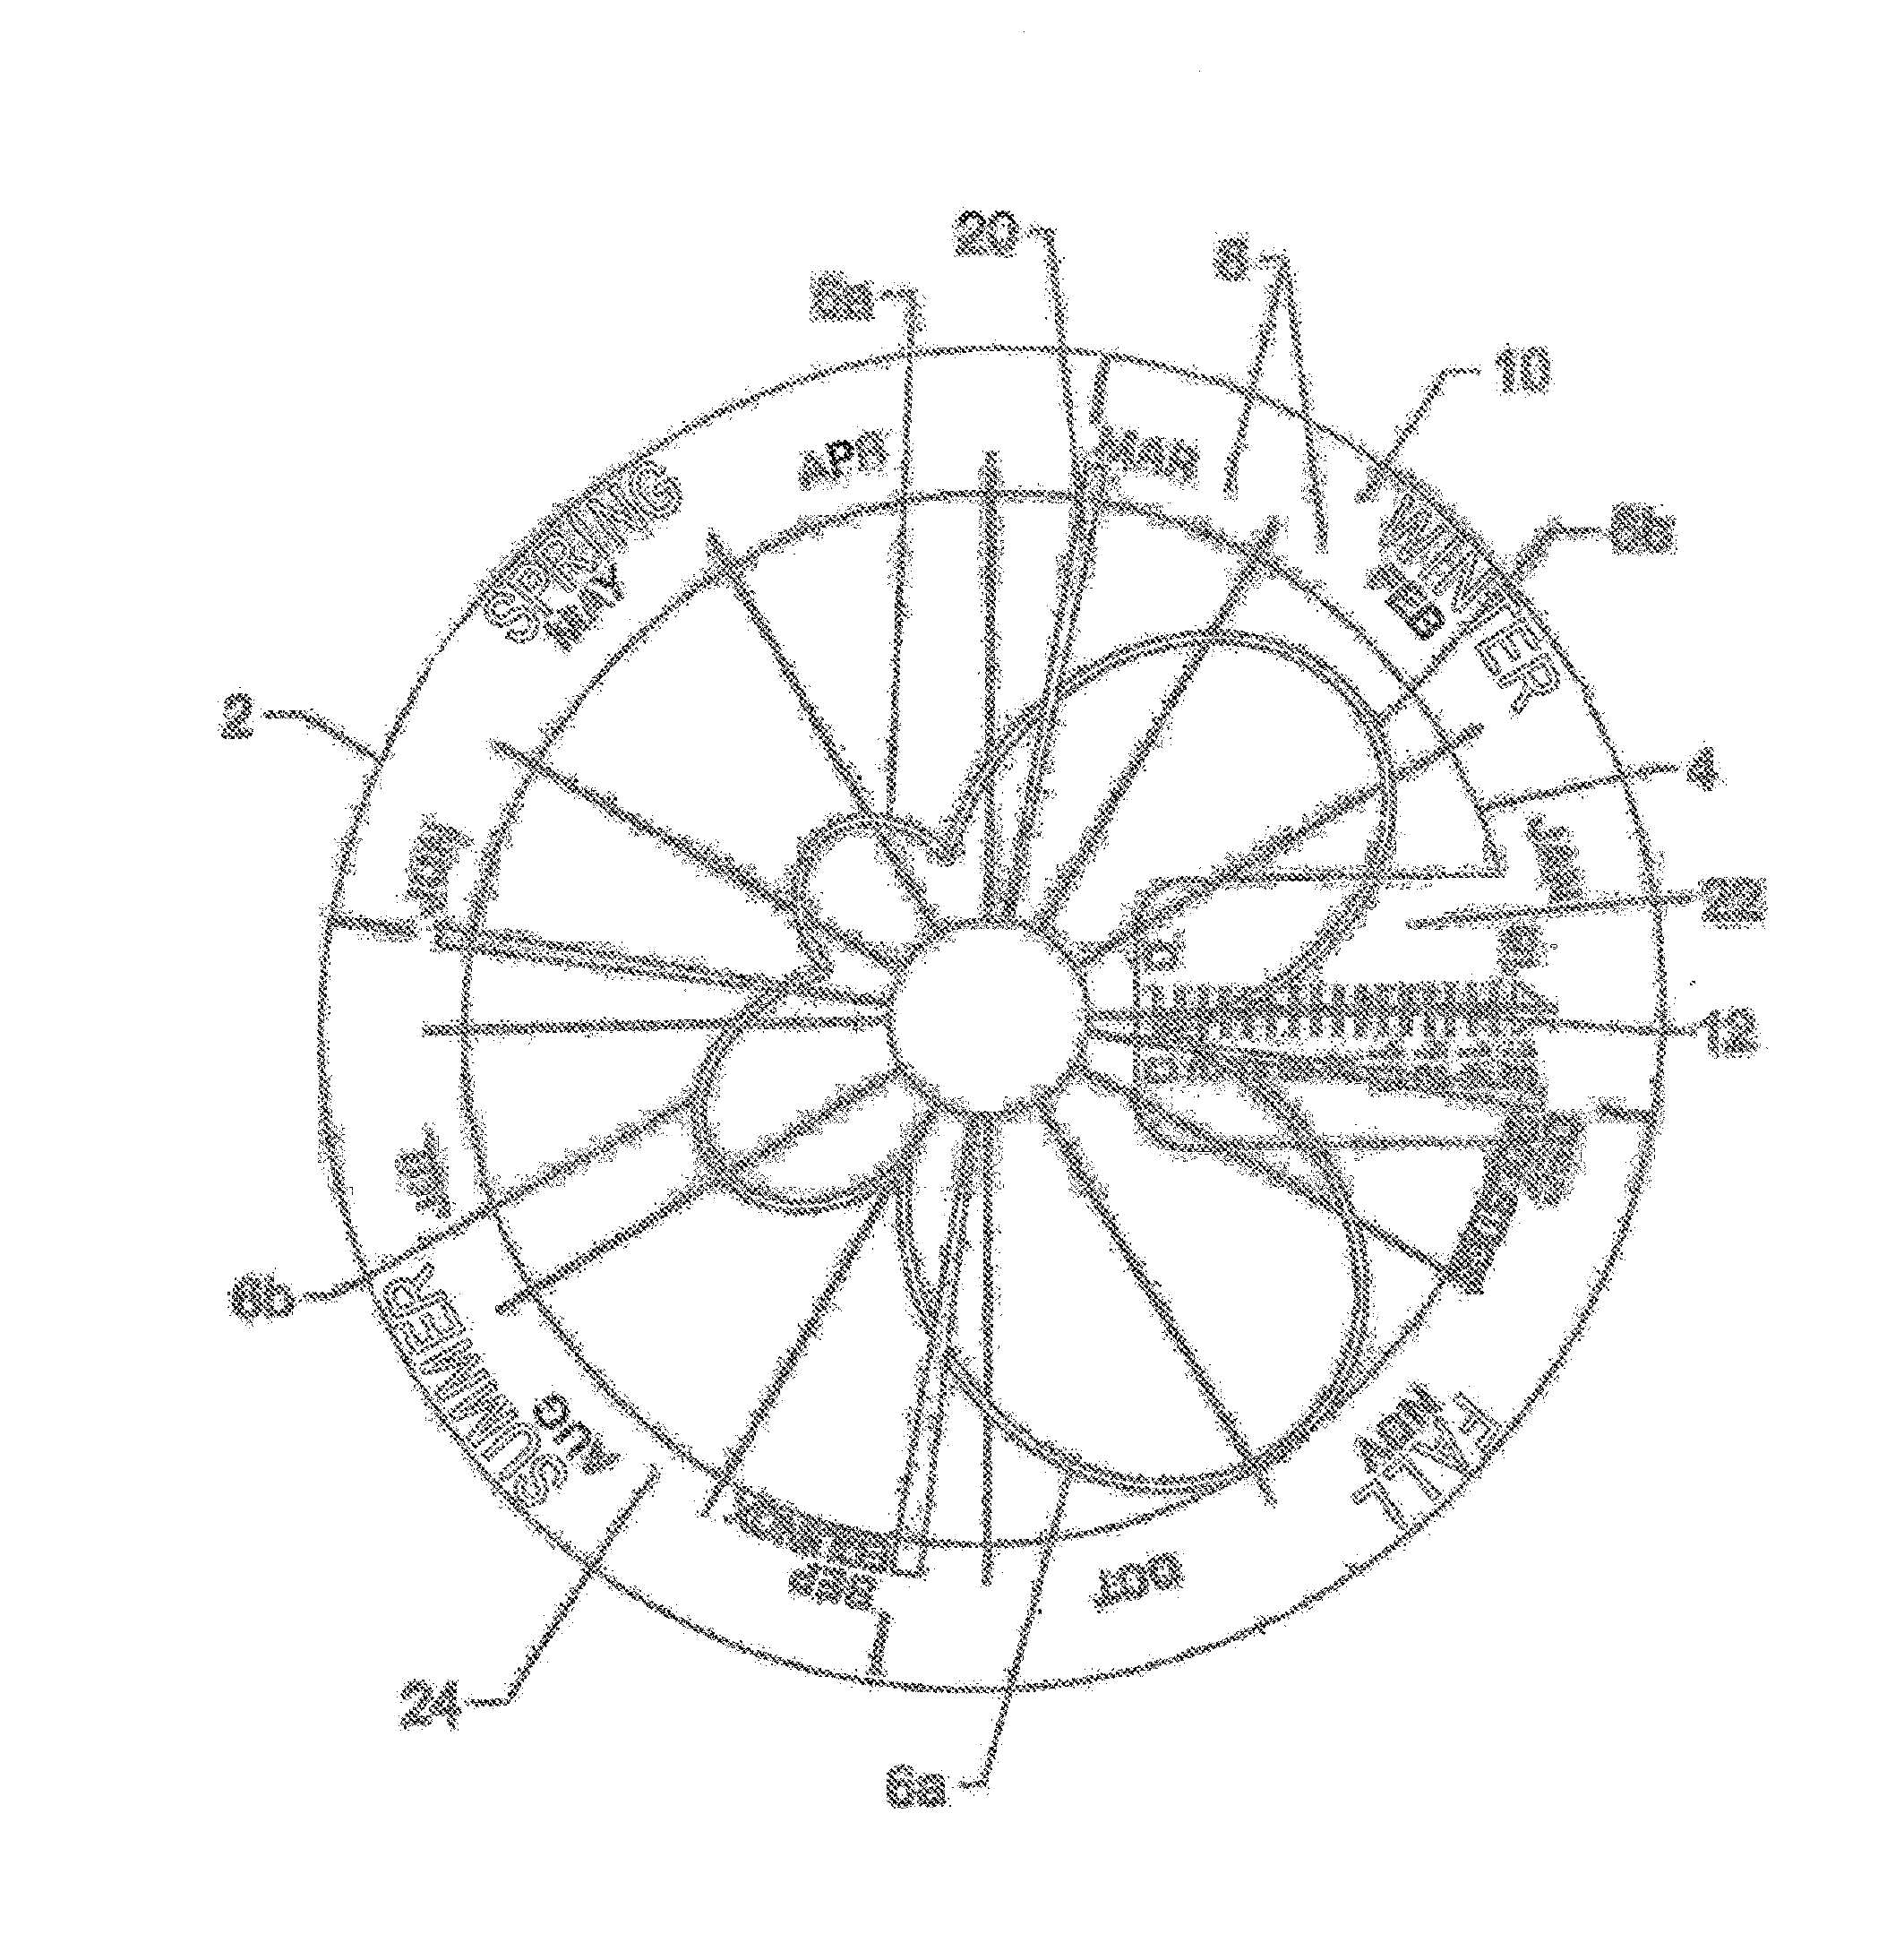 Timepiece comprising a device for displaying the equation of time